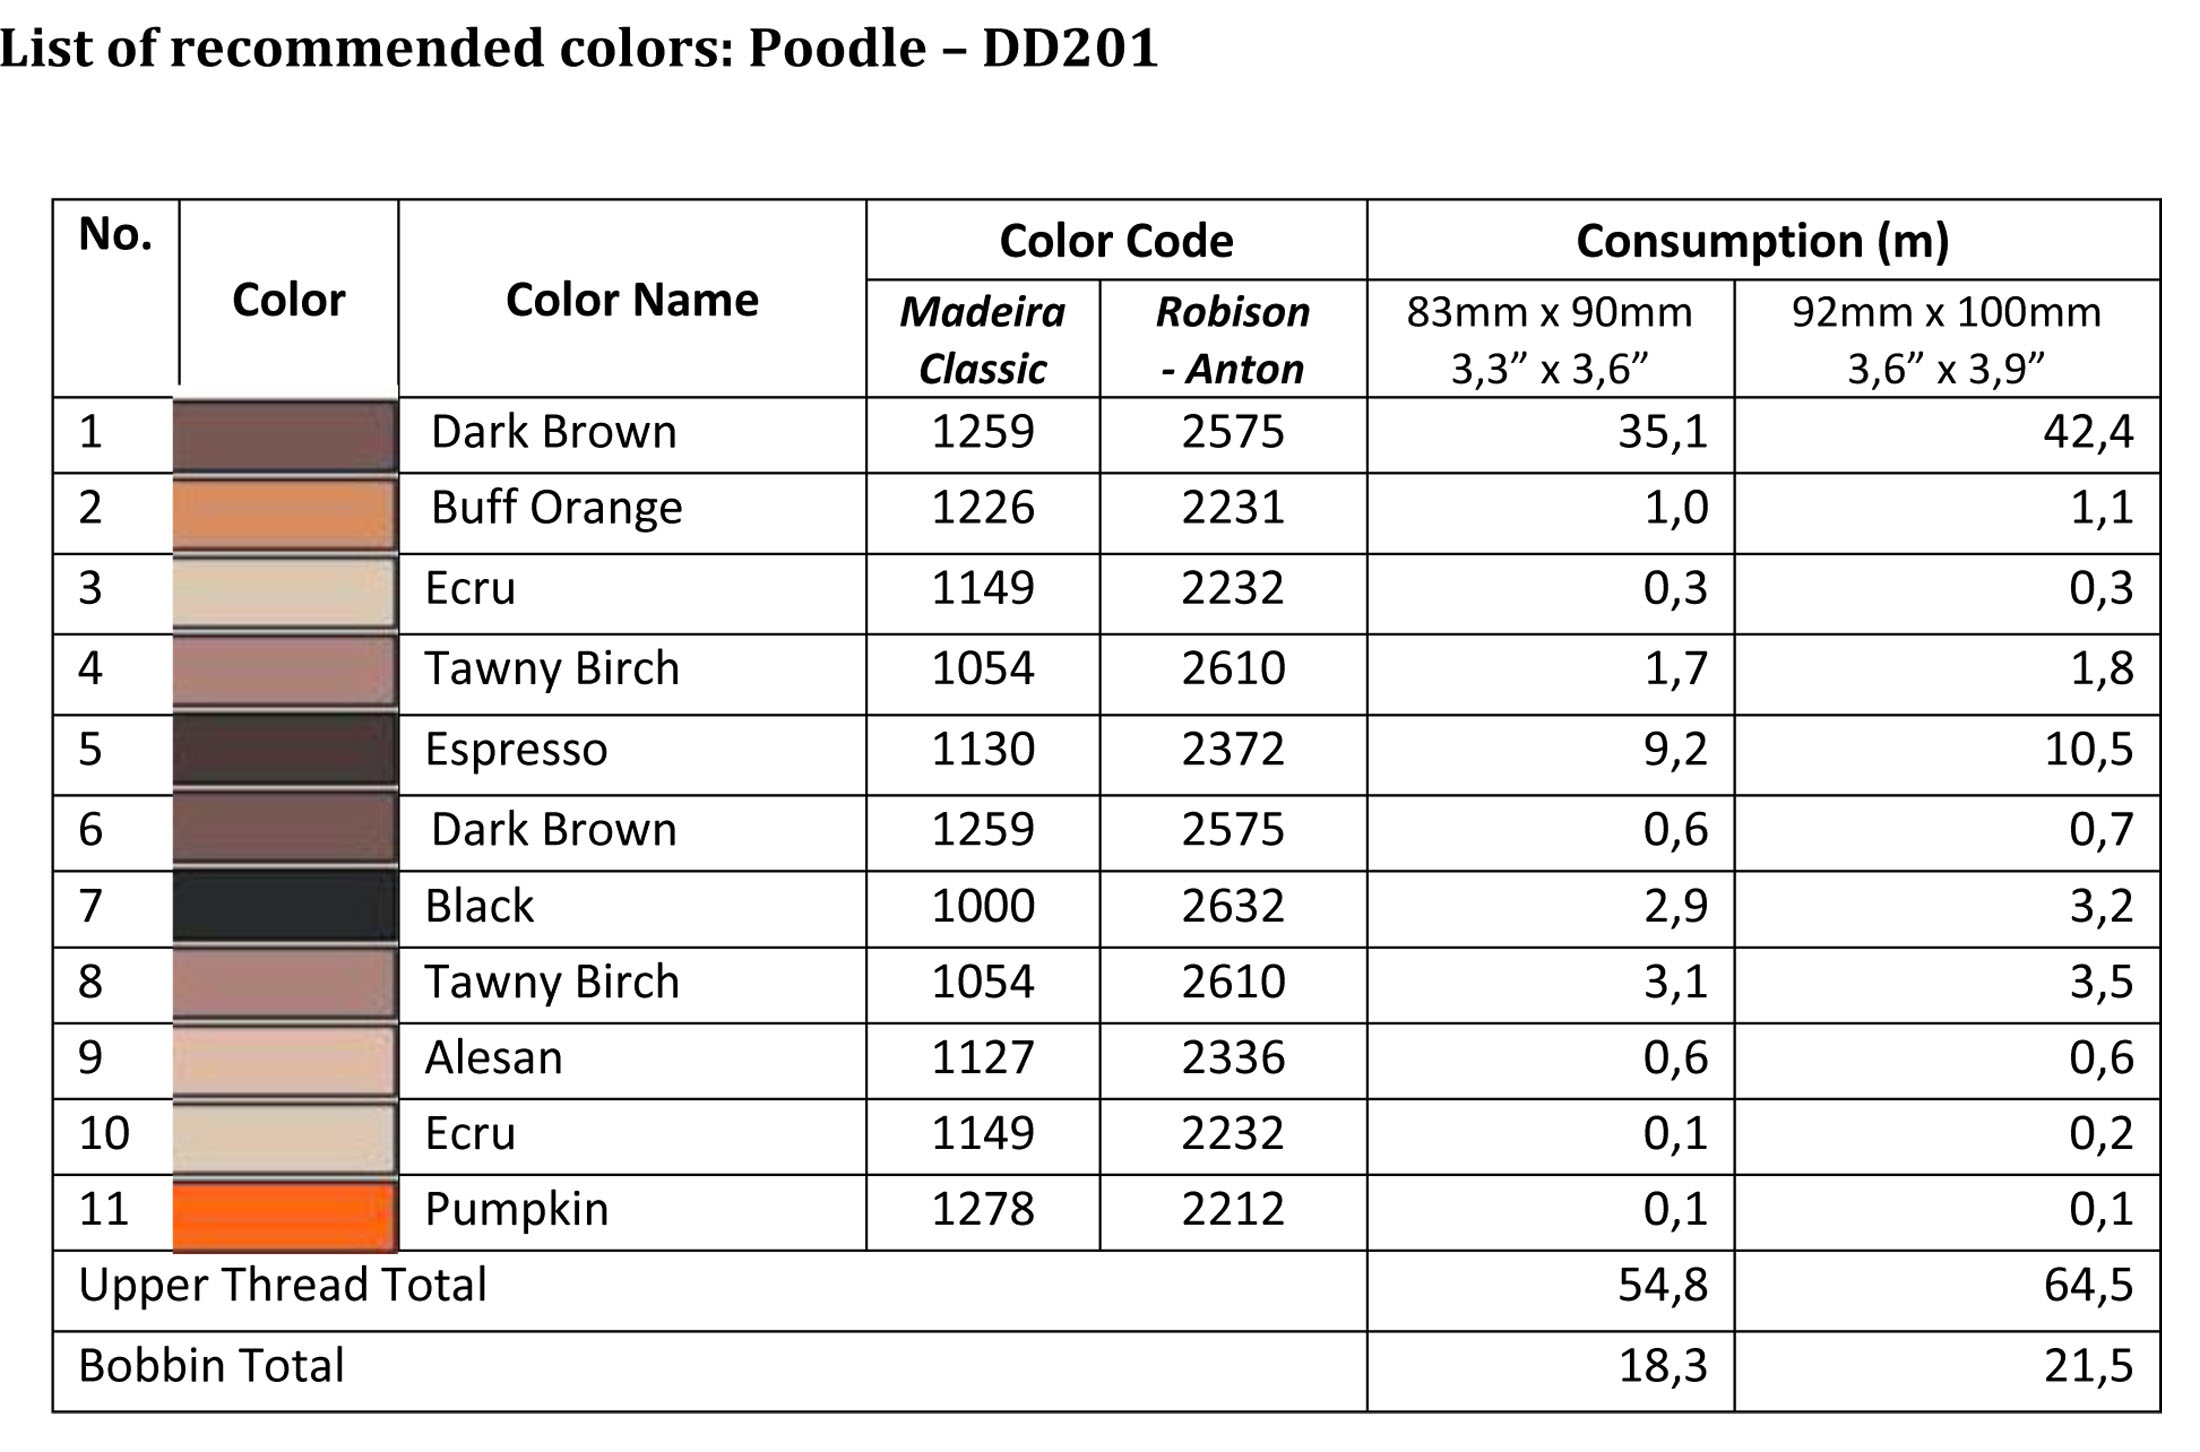 List of recommended colors - DD201